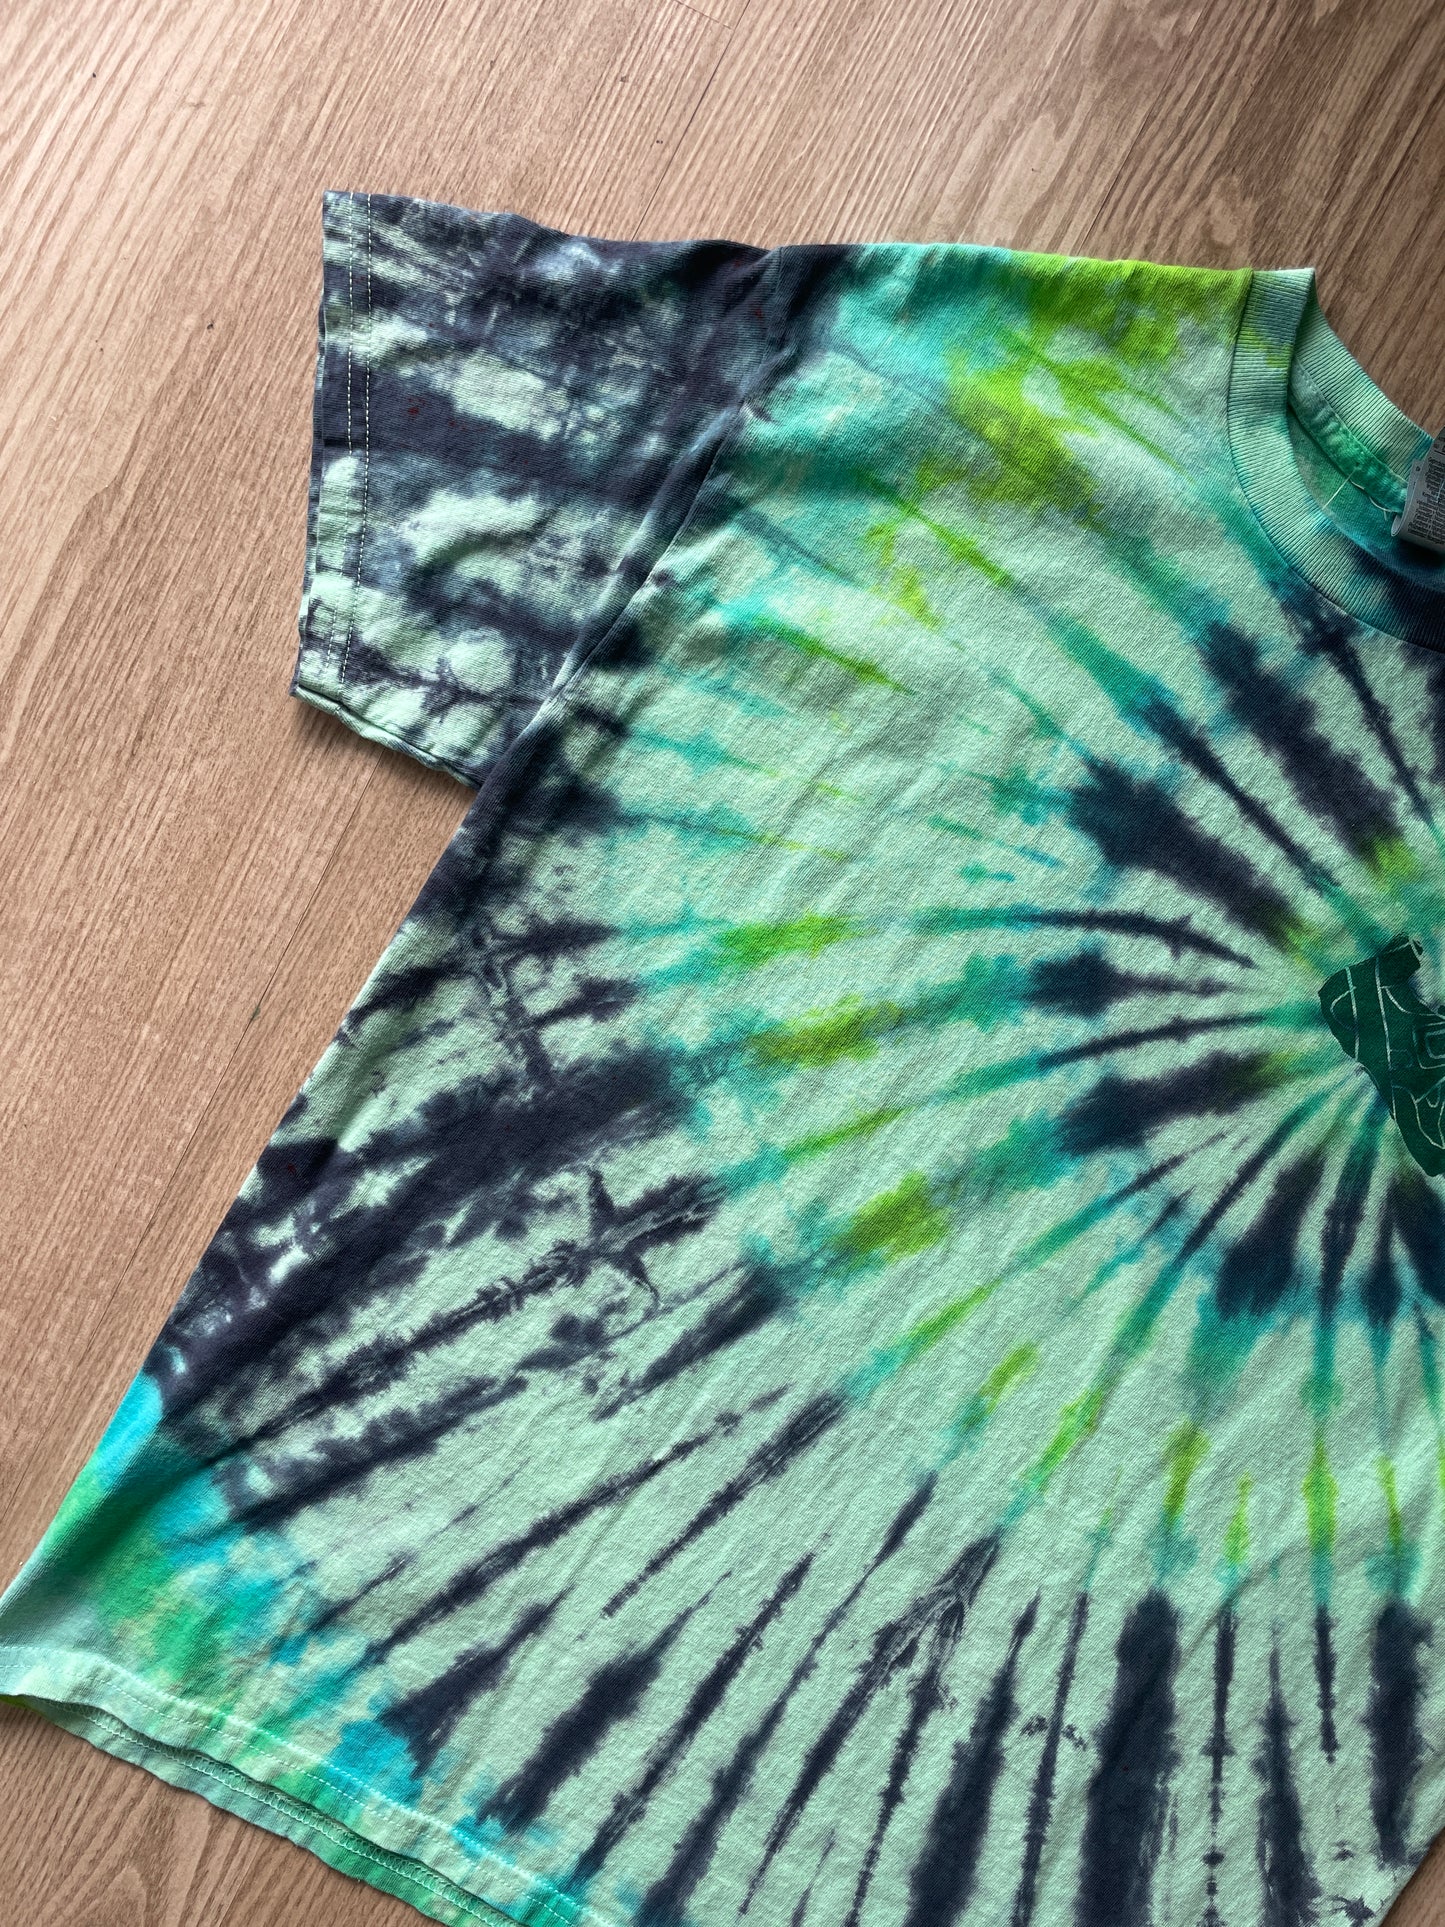 LARGE Men’s Climbing Shoe Handmade Tie Dyed T-Shirt | One-Of-a-Kind Green and Blue Spiral Short Sleeve